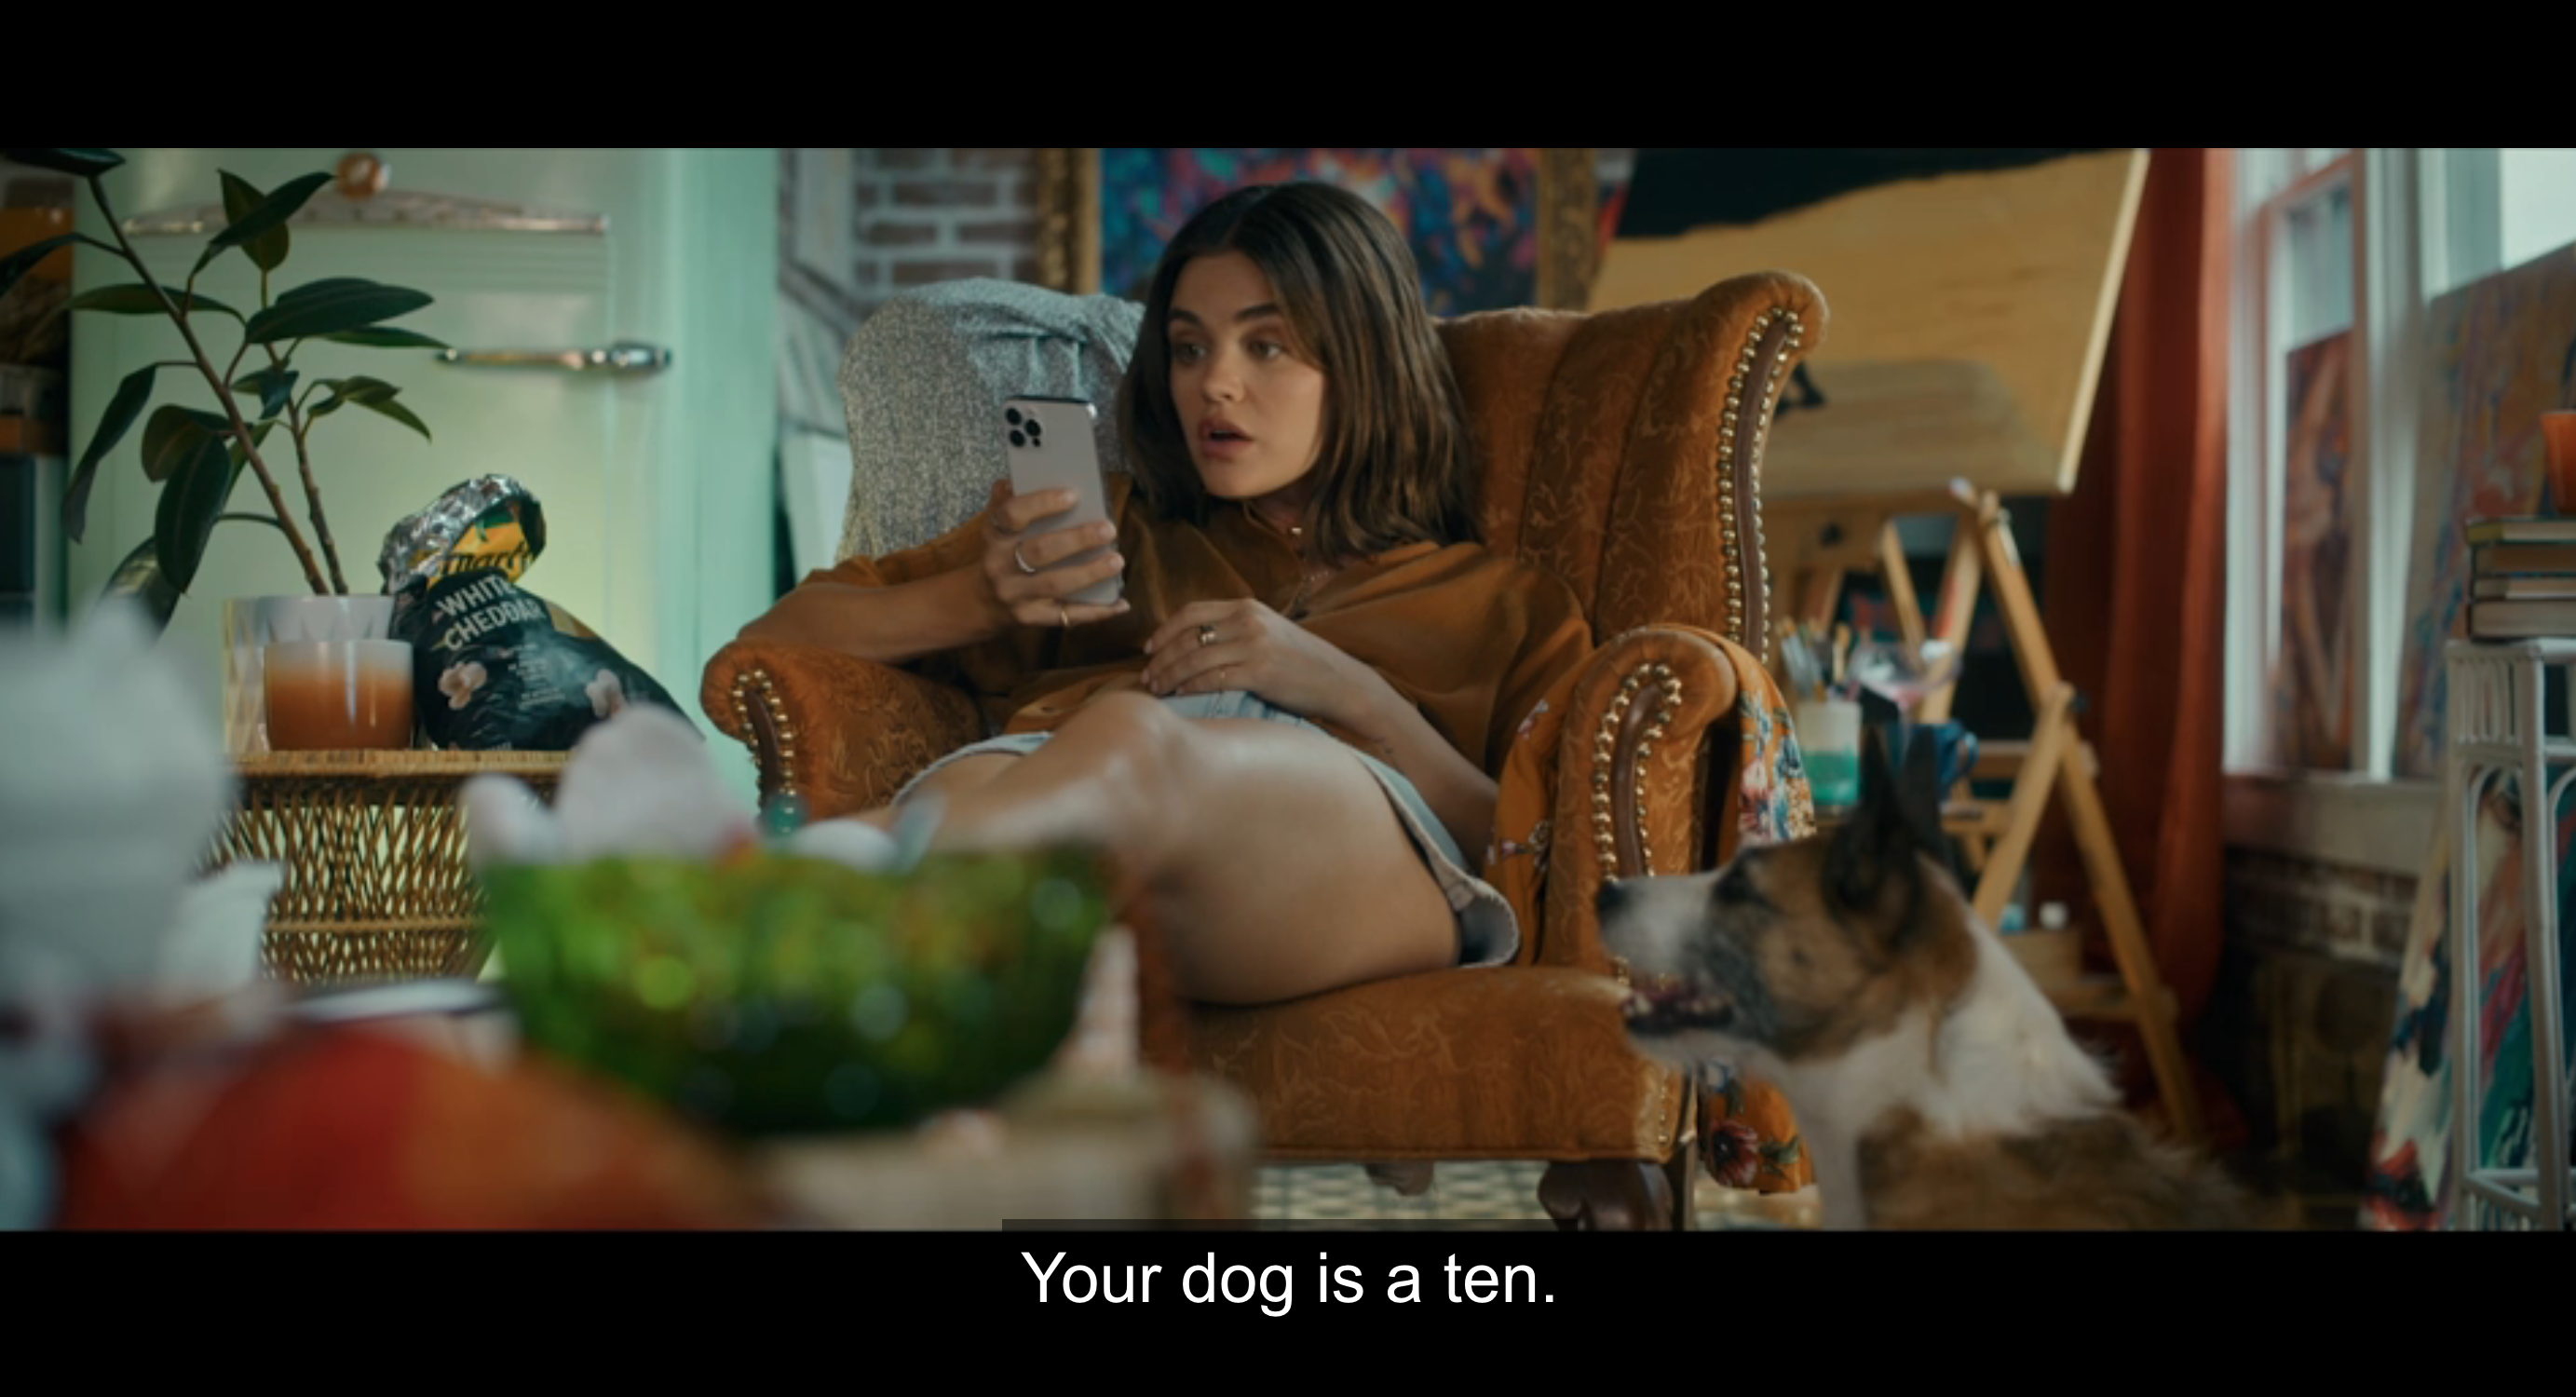 lucy hale in same scene looks surprised, says &#x27;your dog is a ten&#x27;